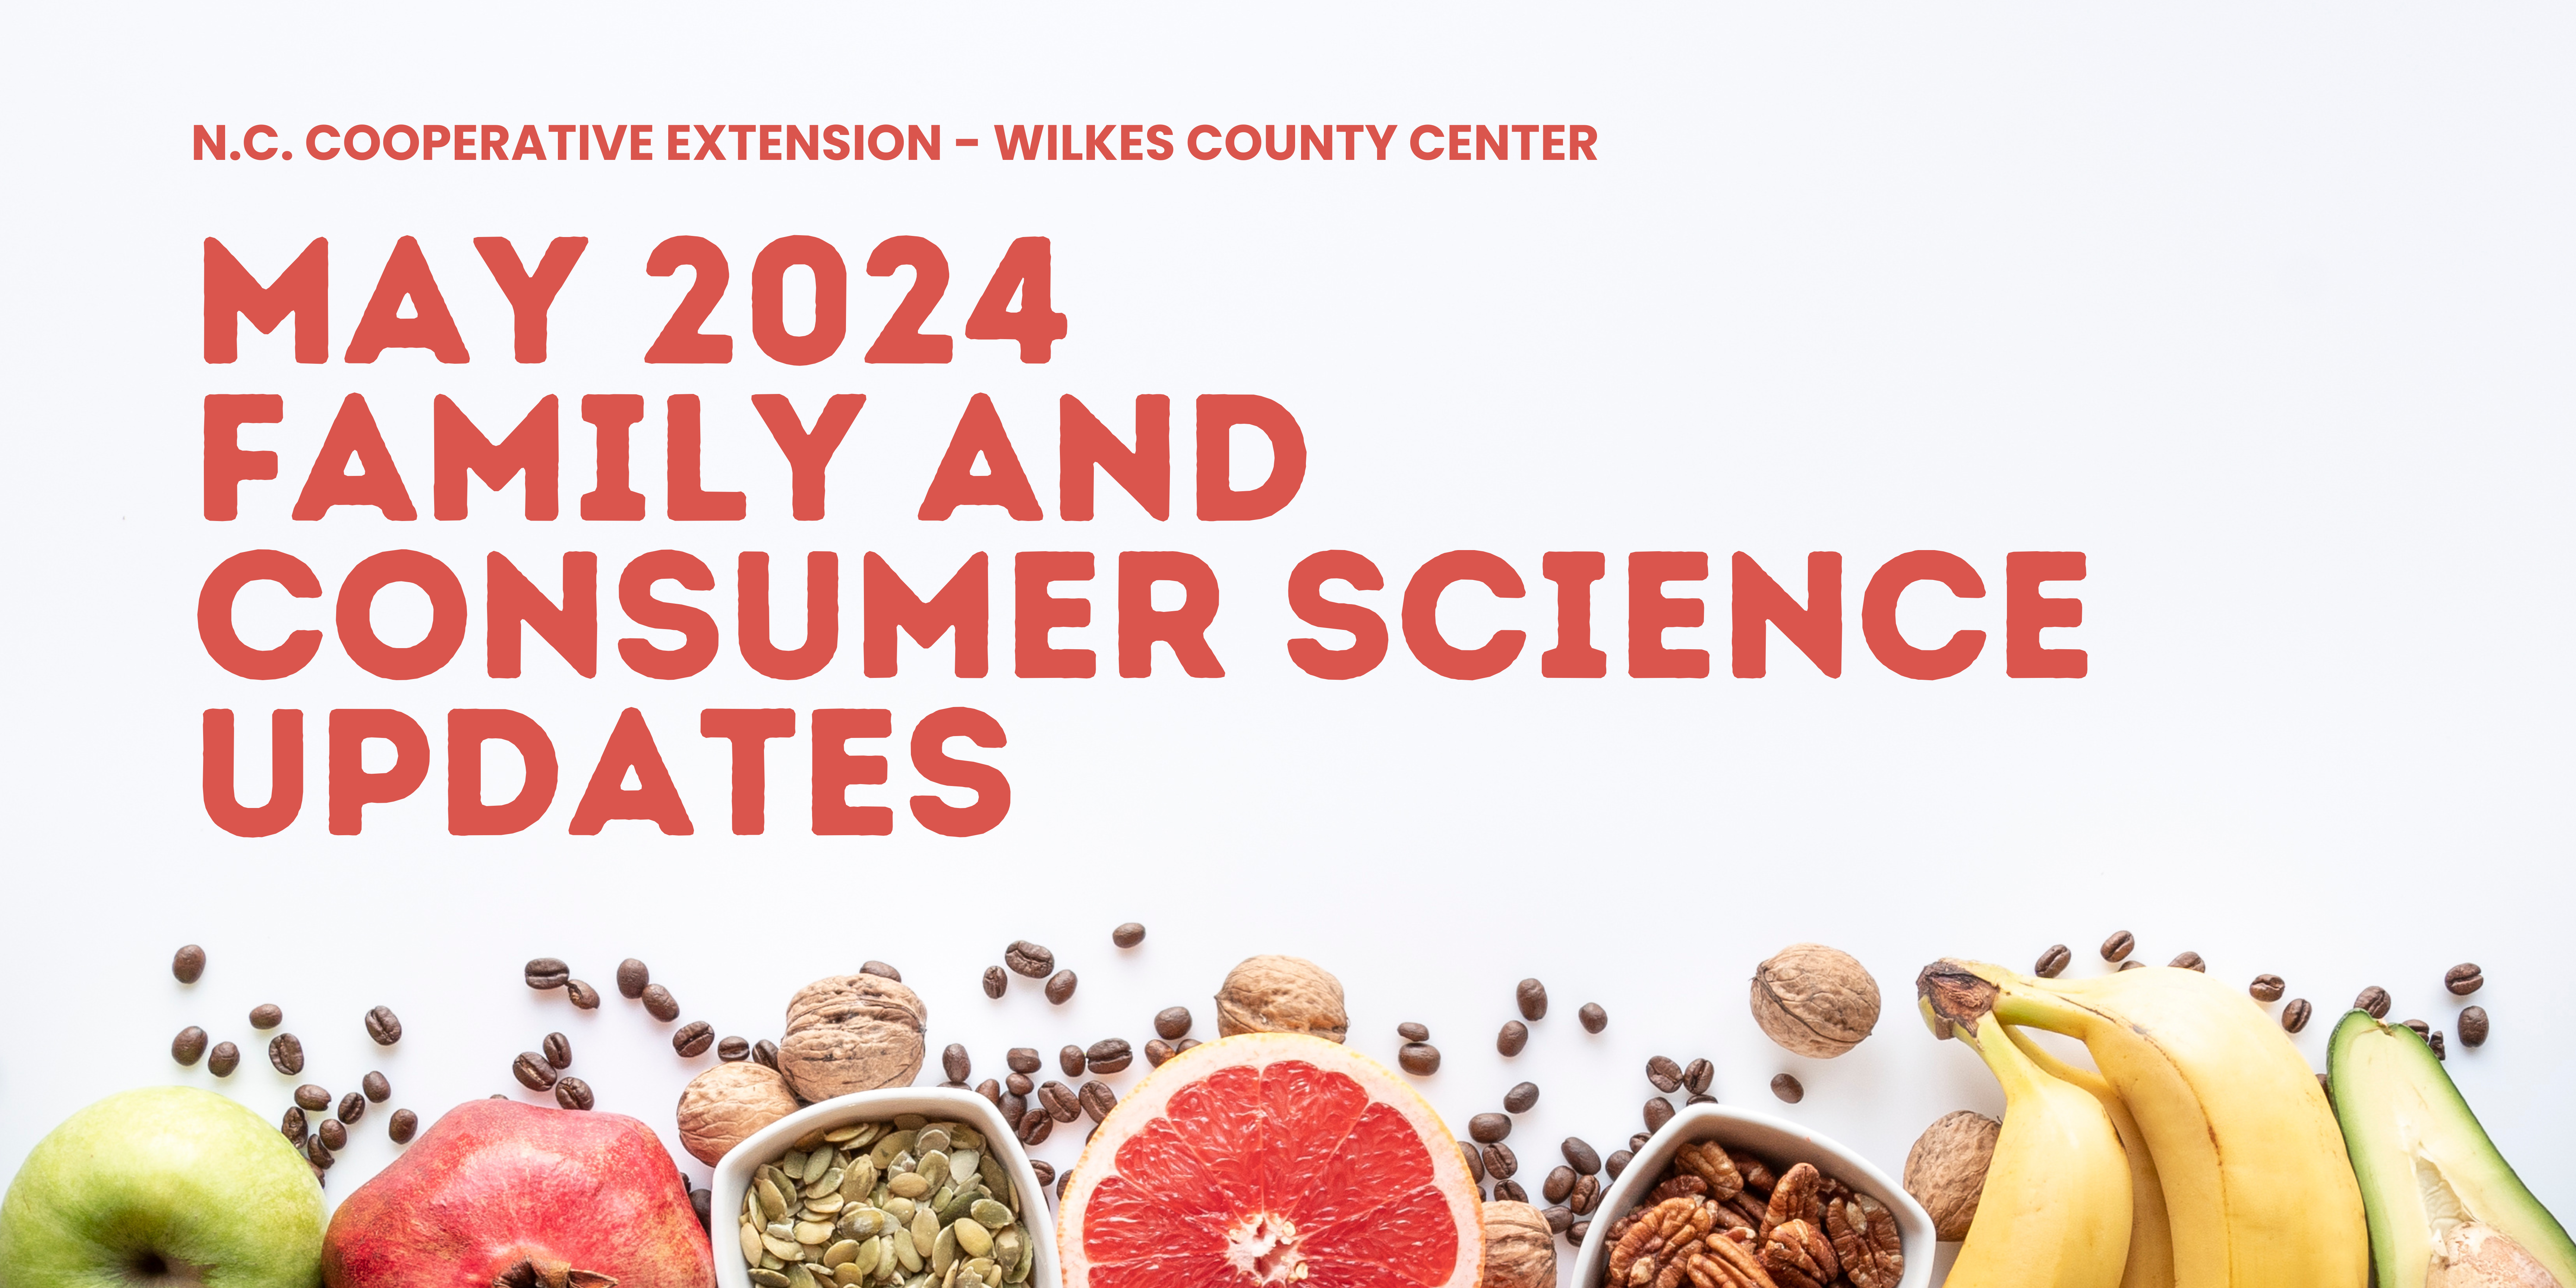 MAY 2024 FAMILY AND CONSUMER SCIENCE UPDATES